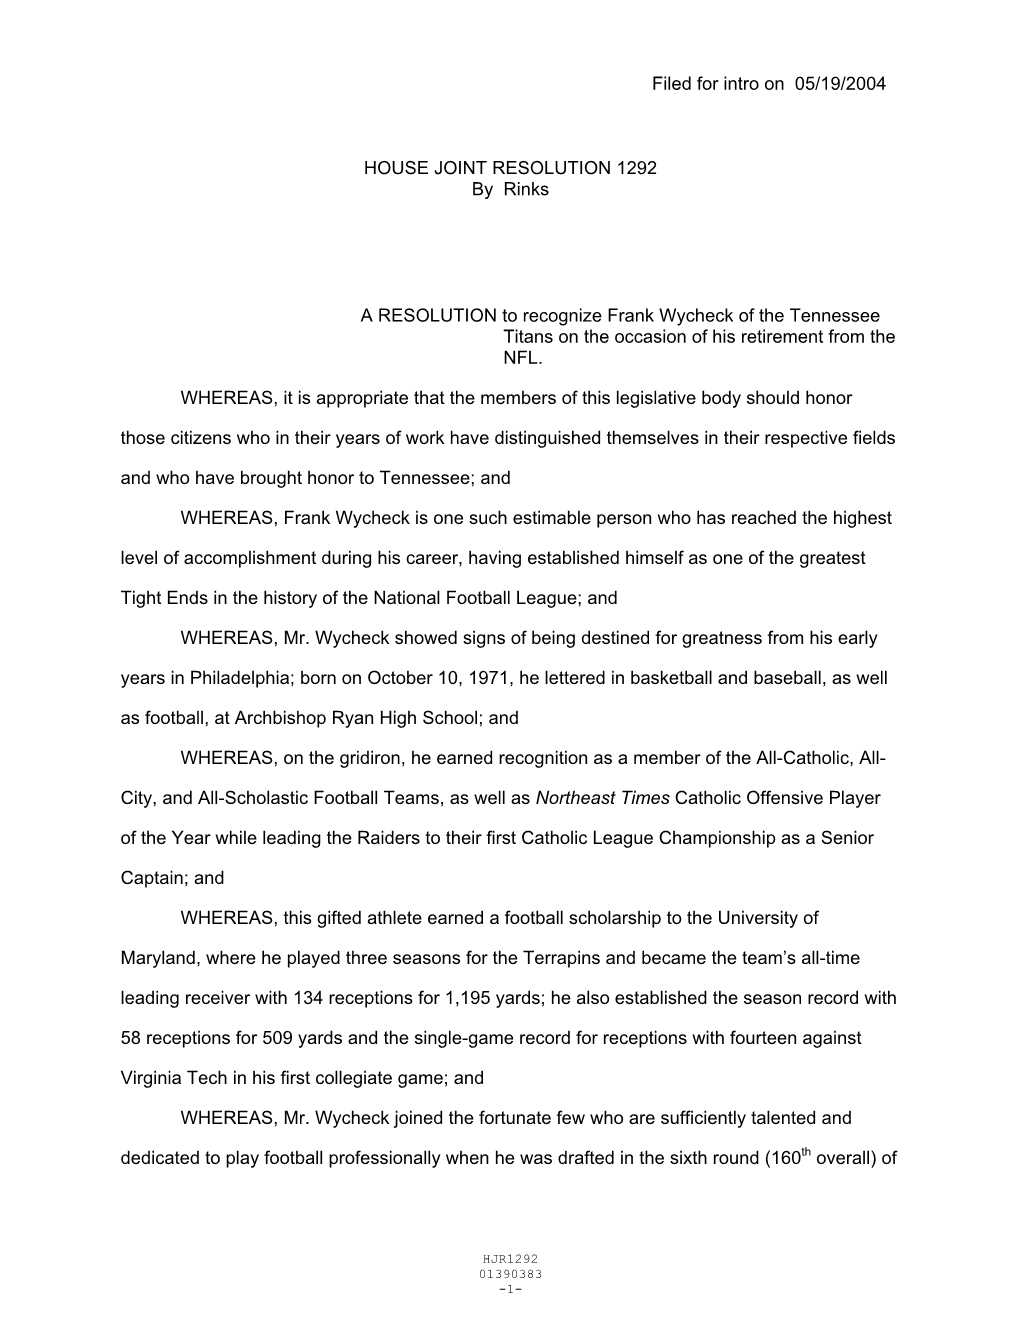 Filed for Intro on 05/19/2004 HOUSE JOINT RESOLUTION 1292 By